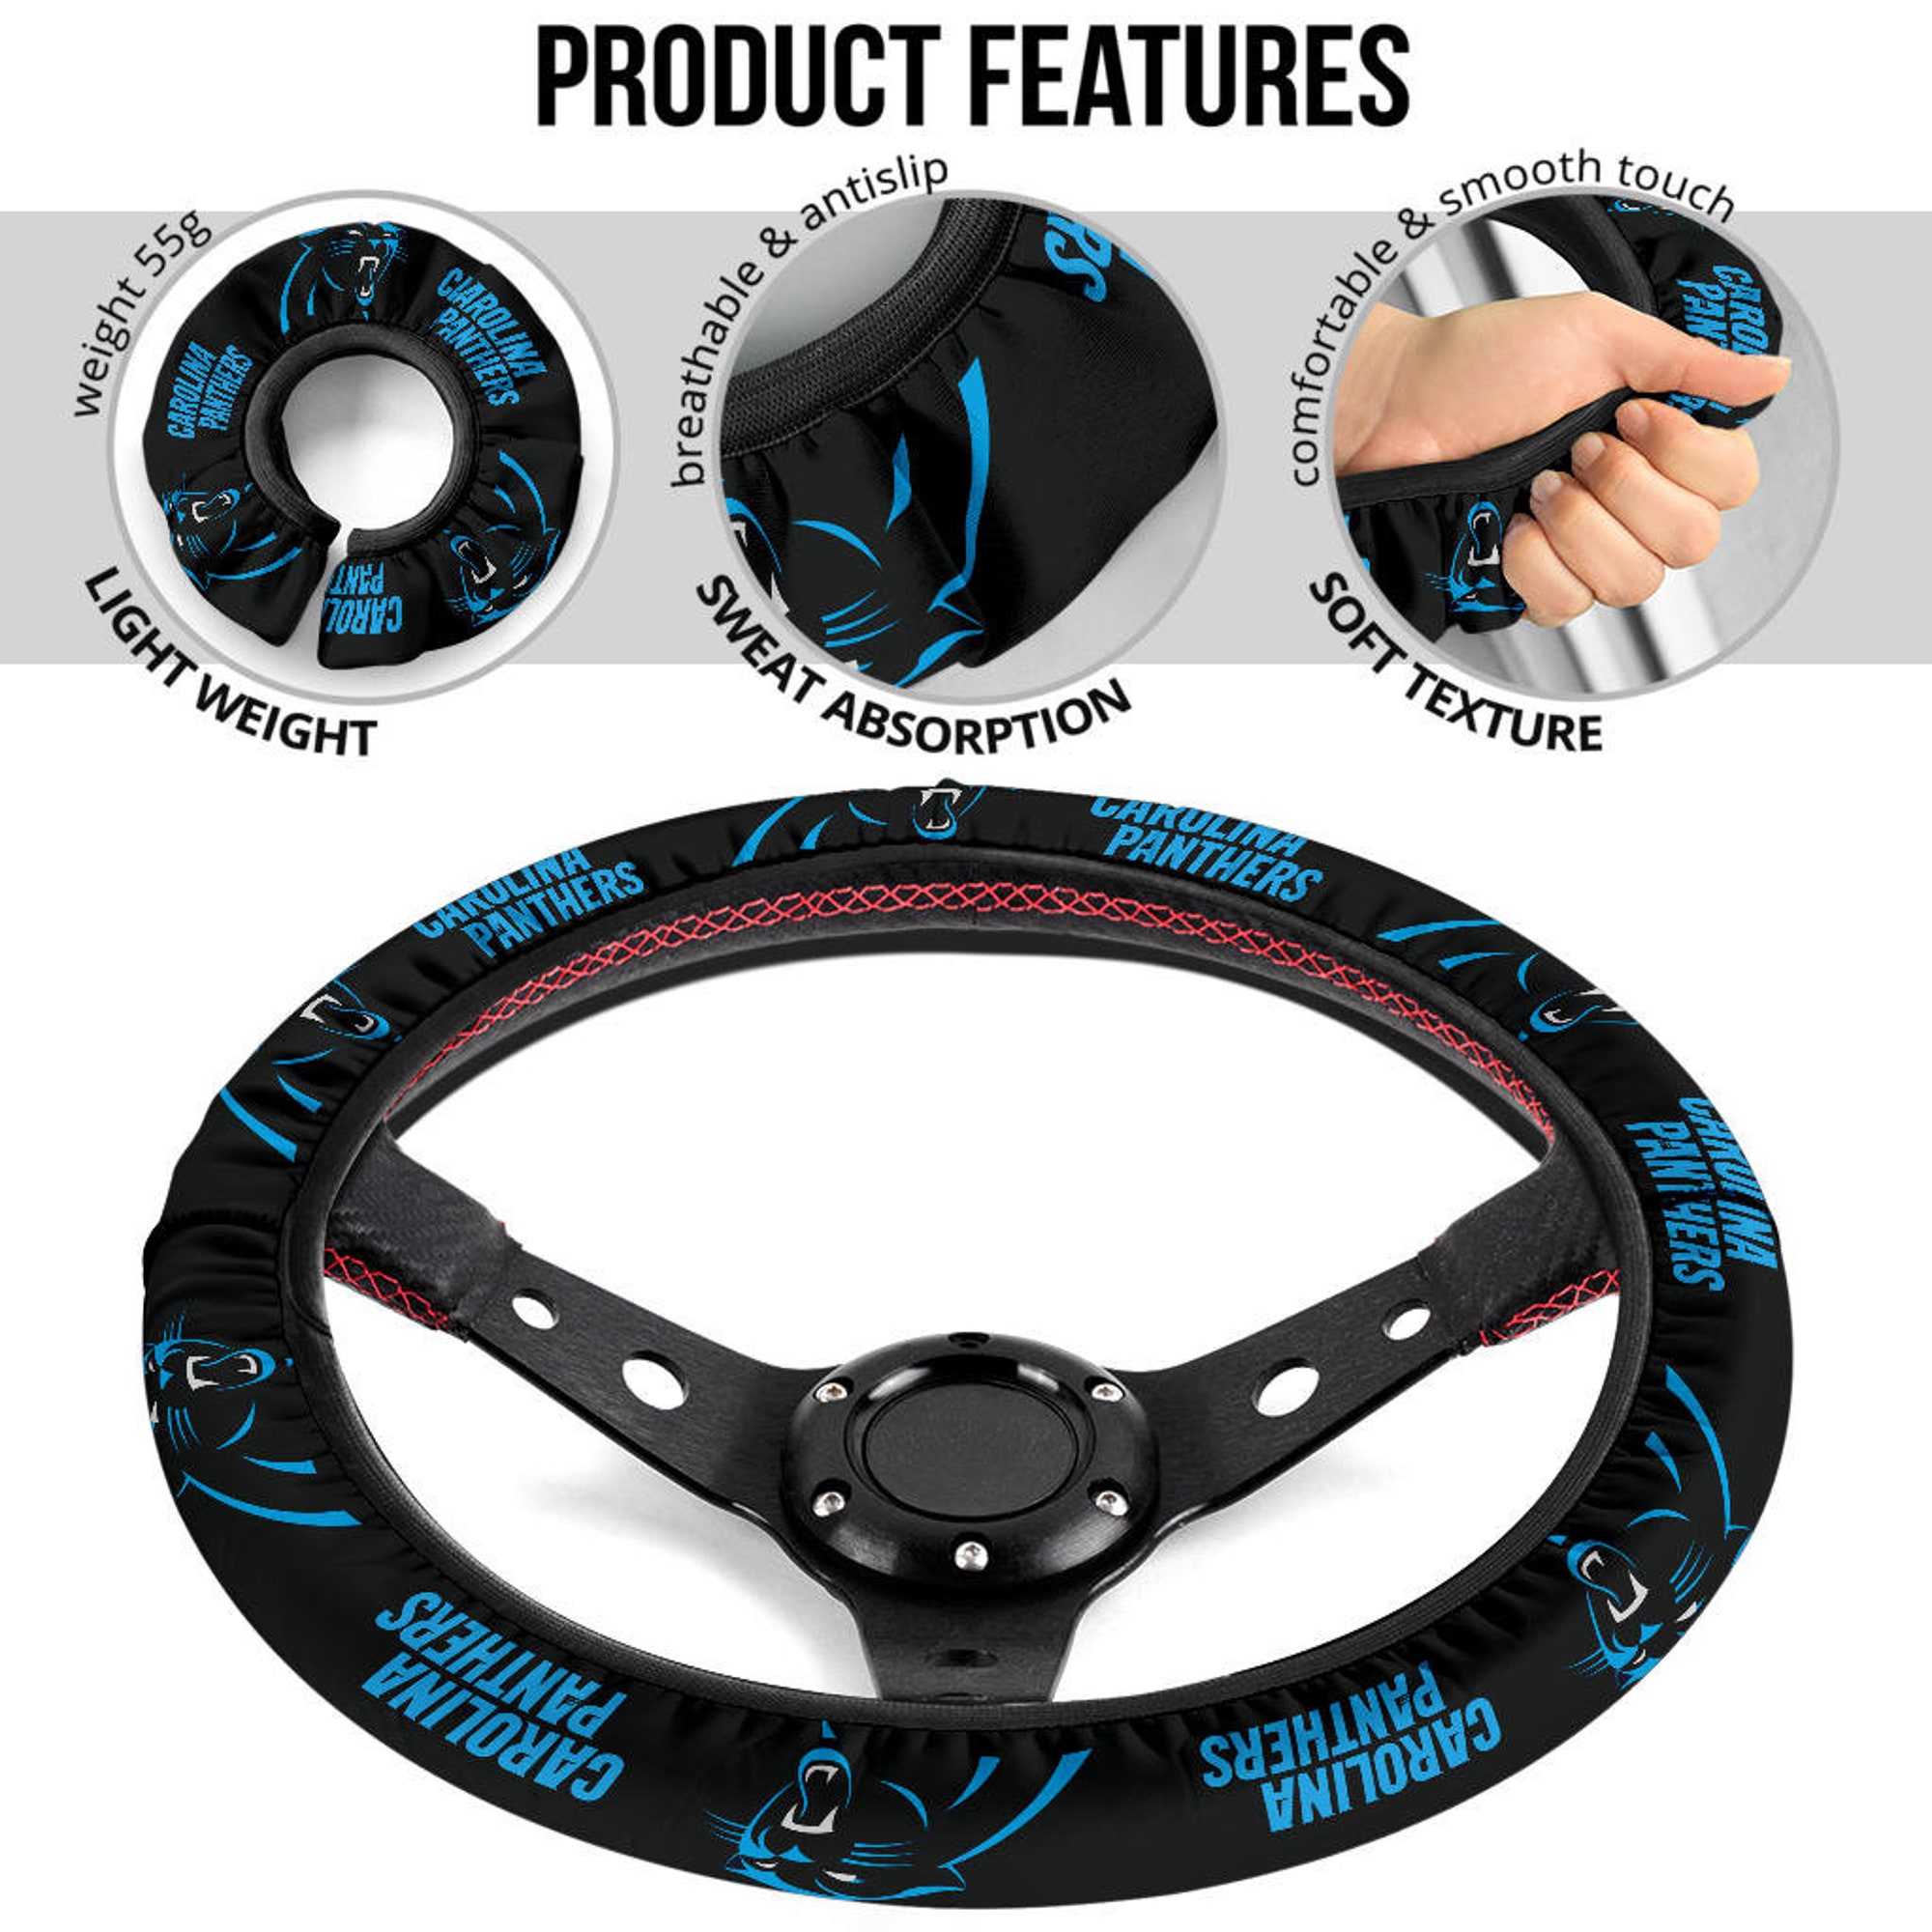 Carolina Panthers themed custom steering wheel cover for a fan